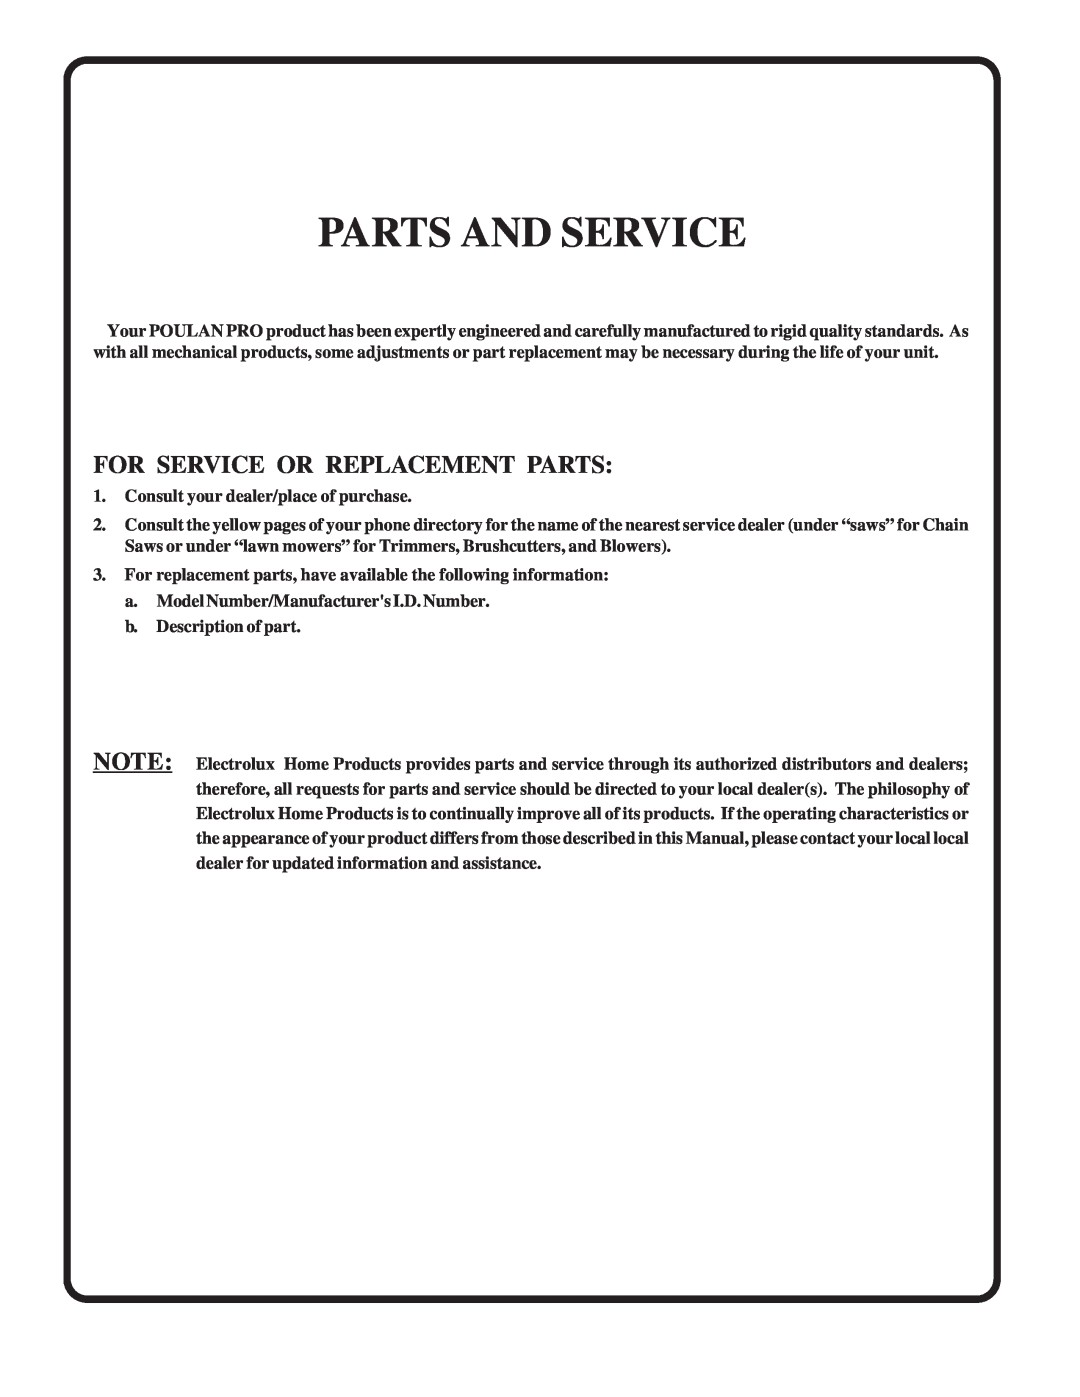 Poulan 183284 owner manual Parts And Service, For Service Or Replacement Parts 